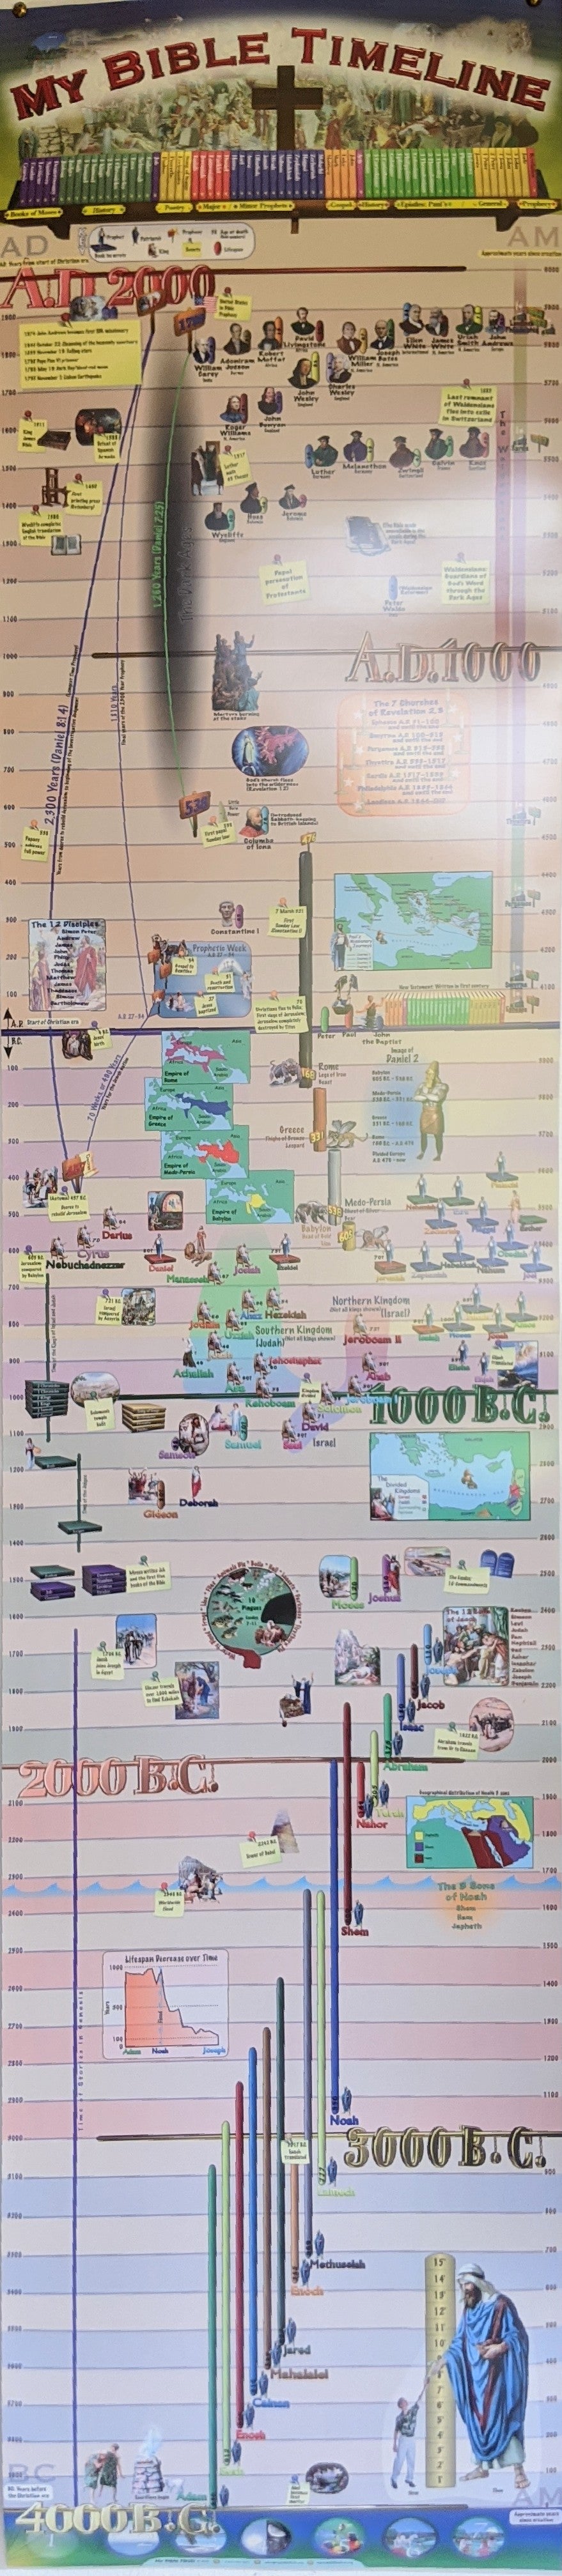 My Bible Timeline Poster